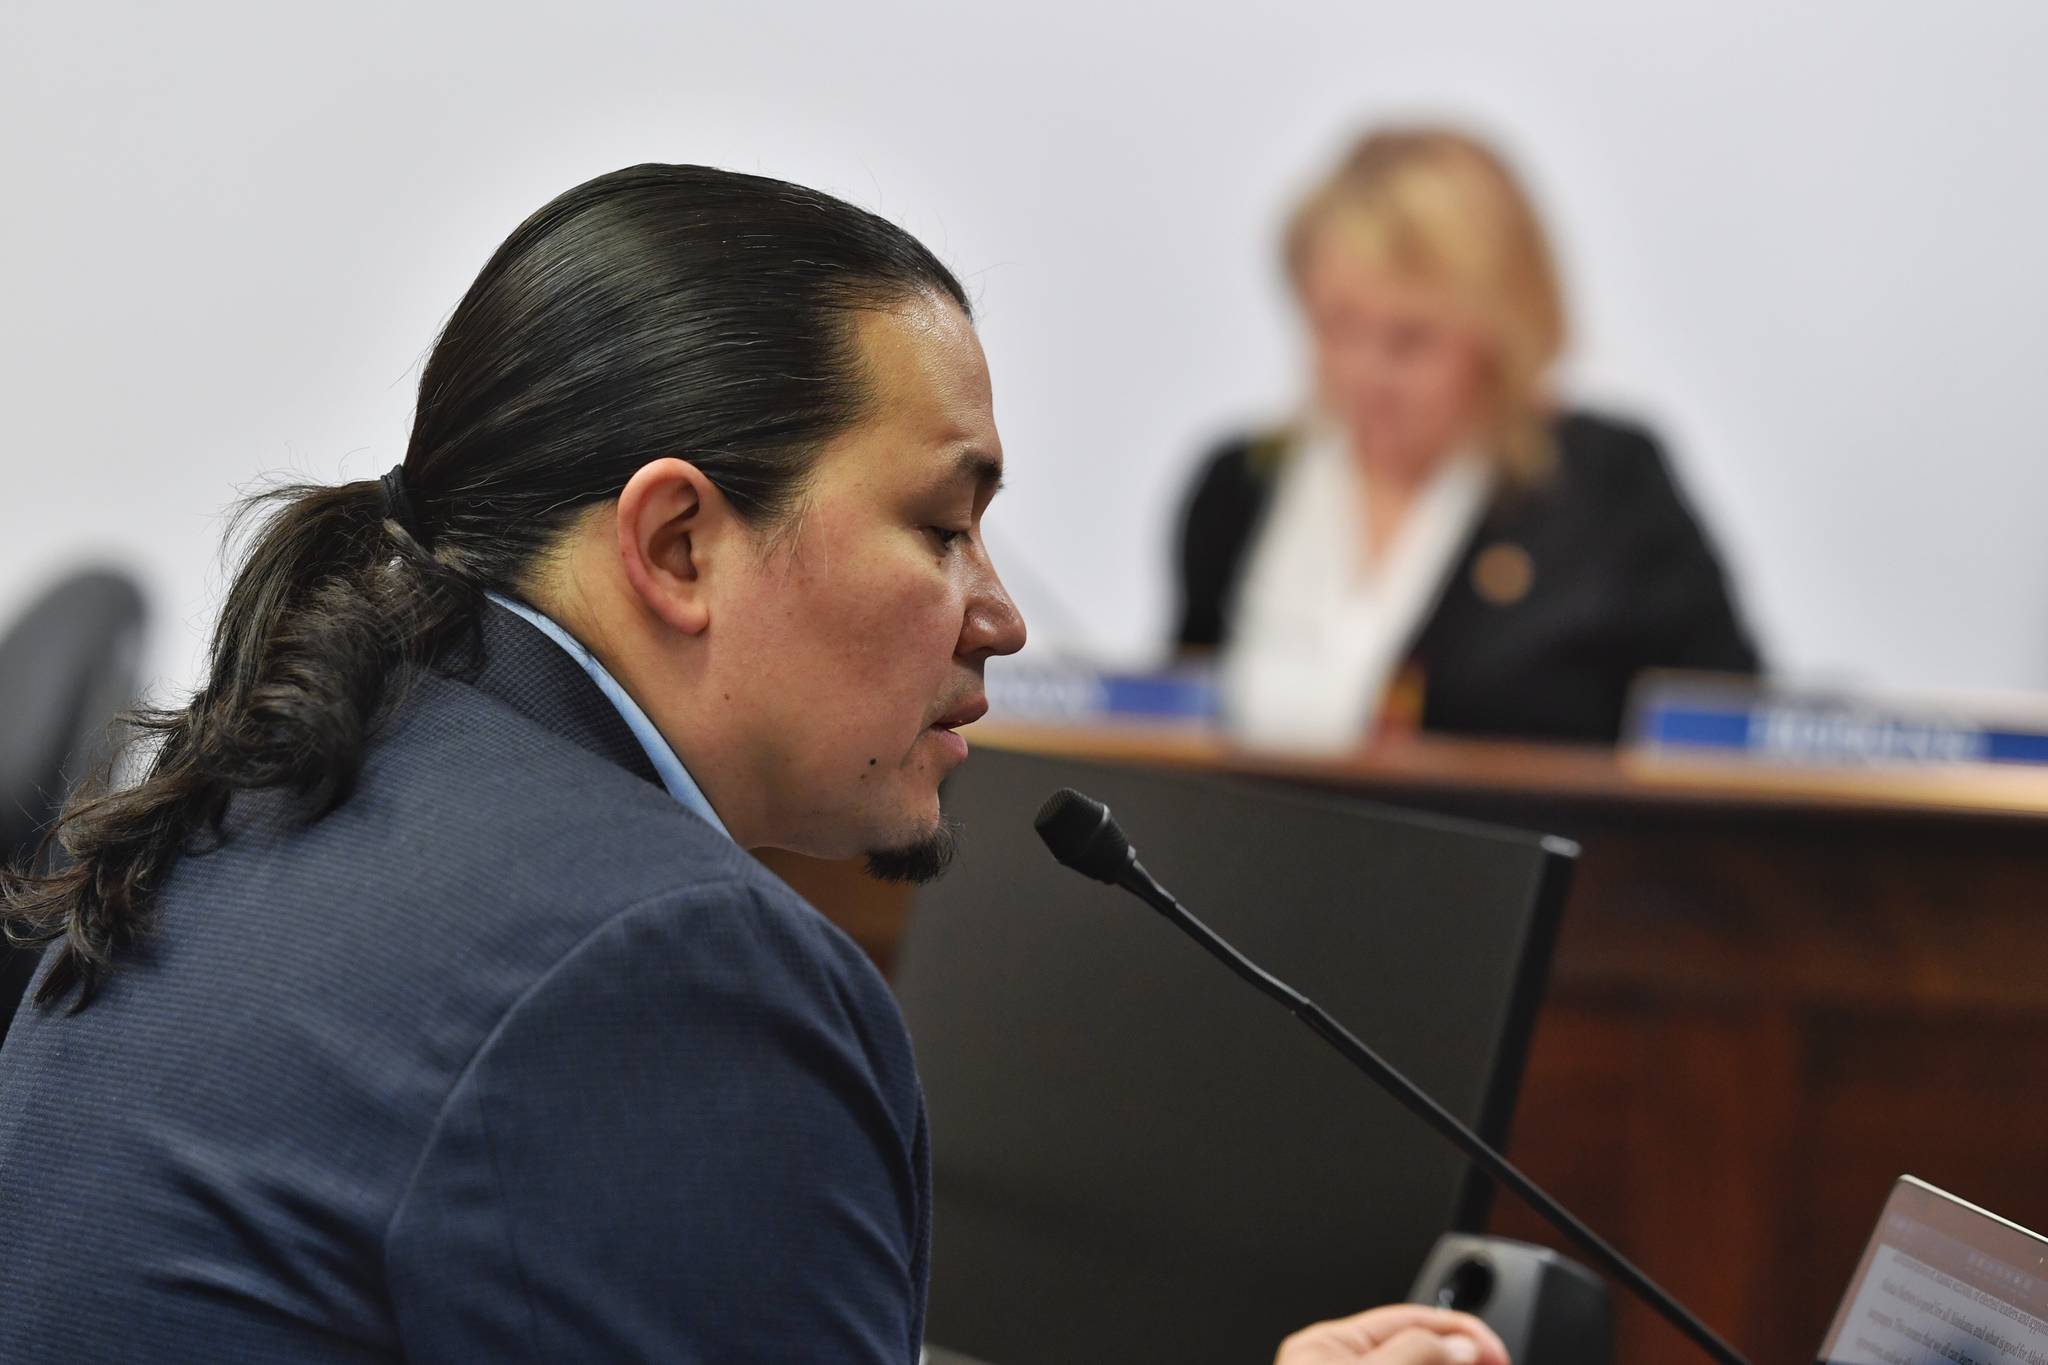 Lance Twitchell, Associate Professor of Alaska Native Languages at the University of Alaska Southeast, testifies in front of the House Education Committee in favor of House Bill 24 on Monday, April 1, 2019.